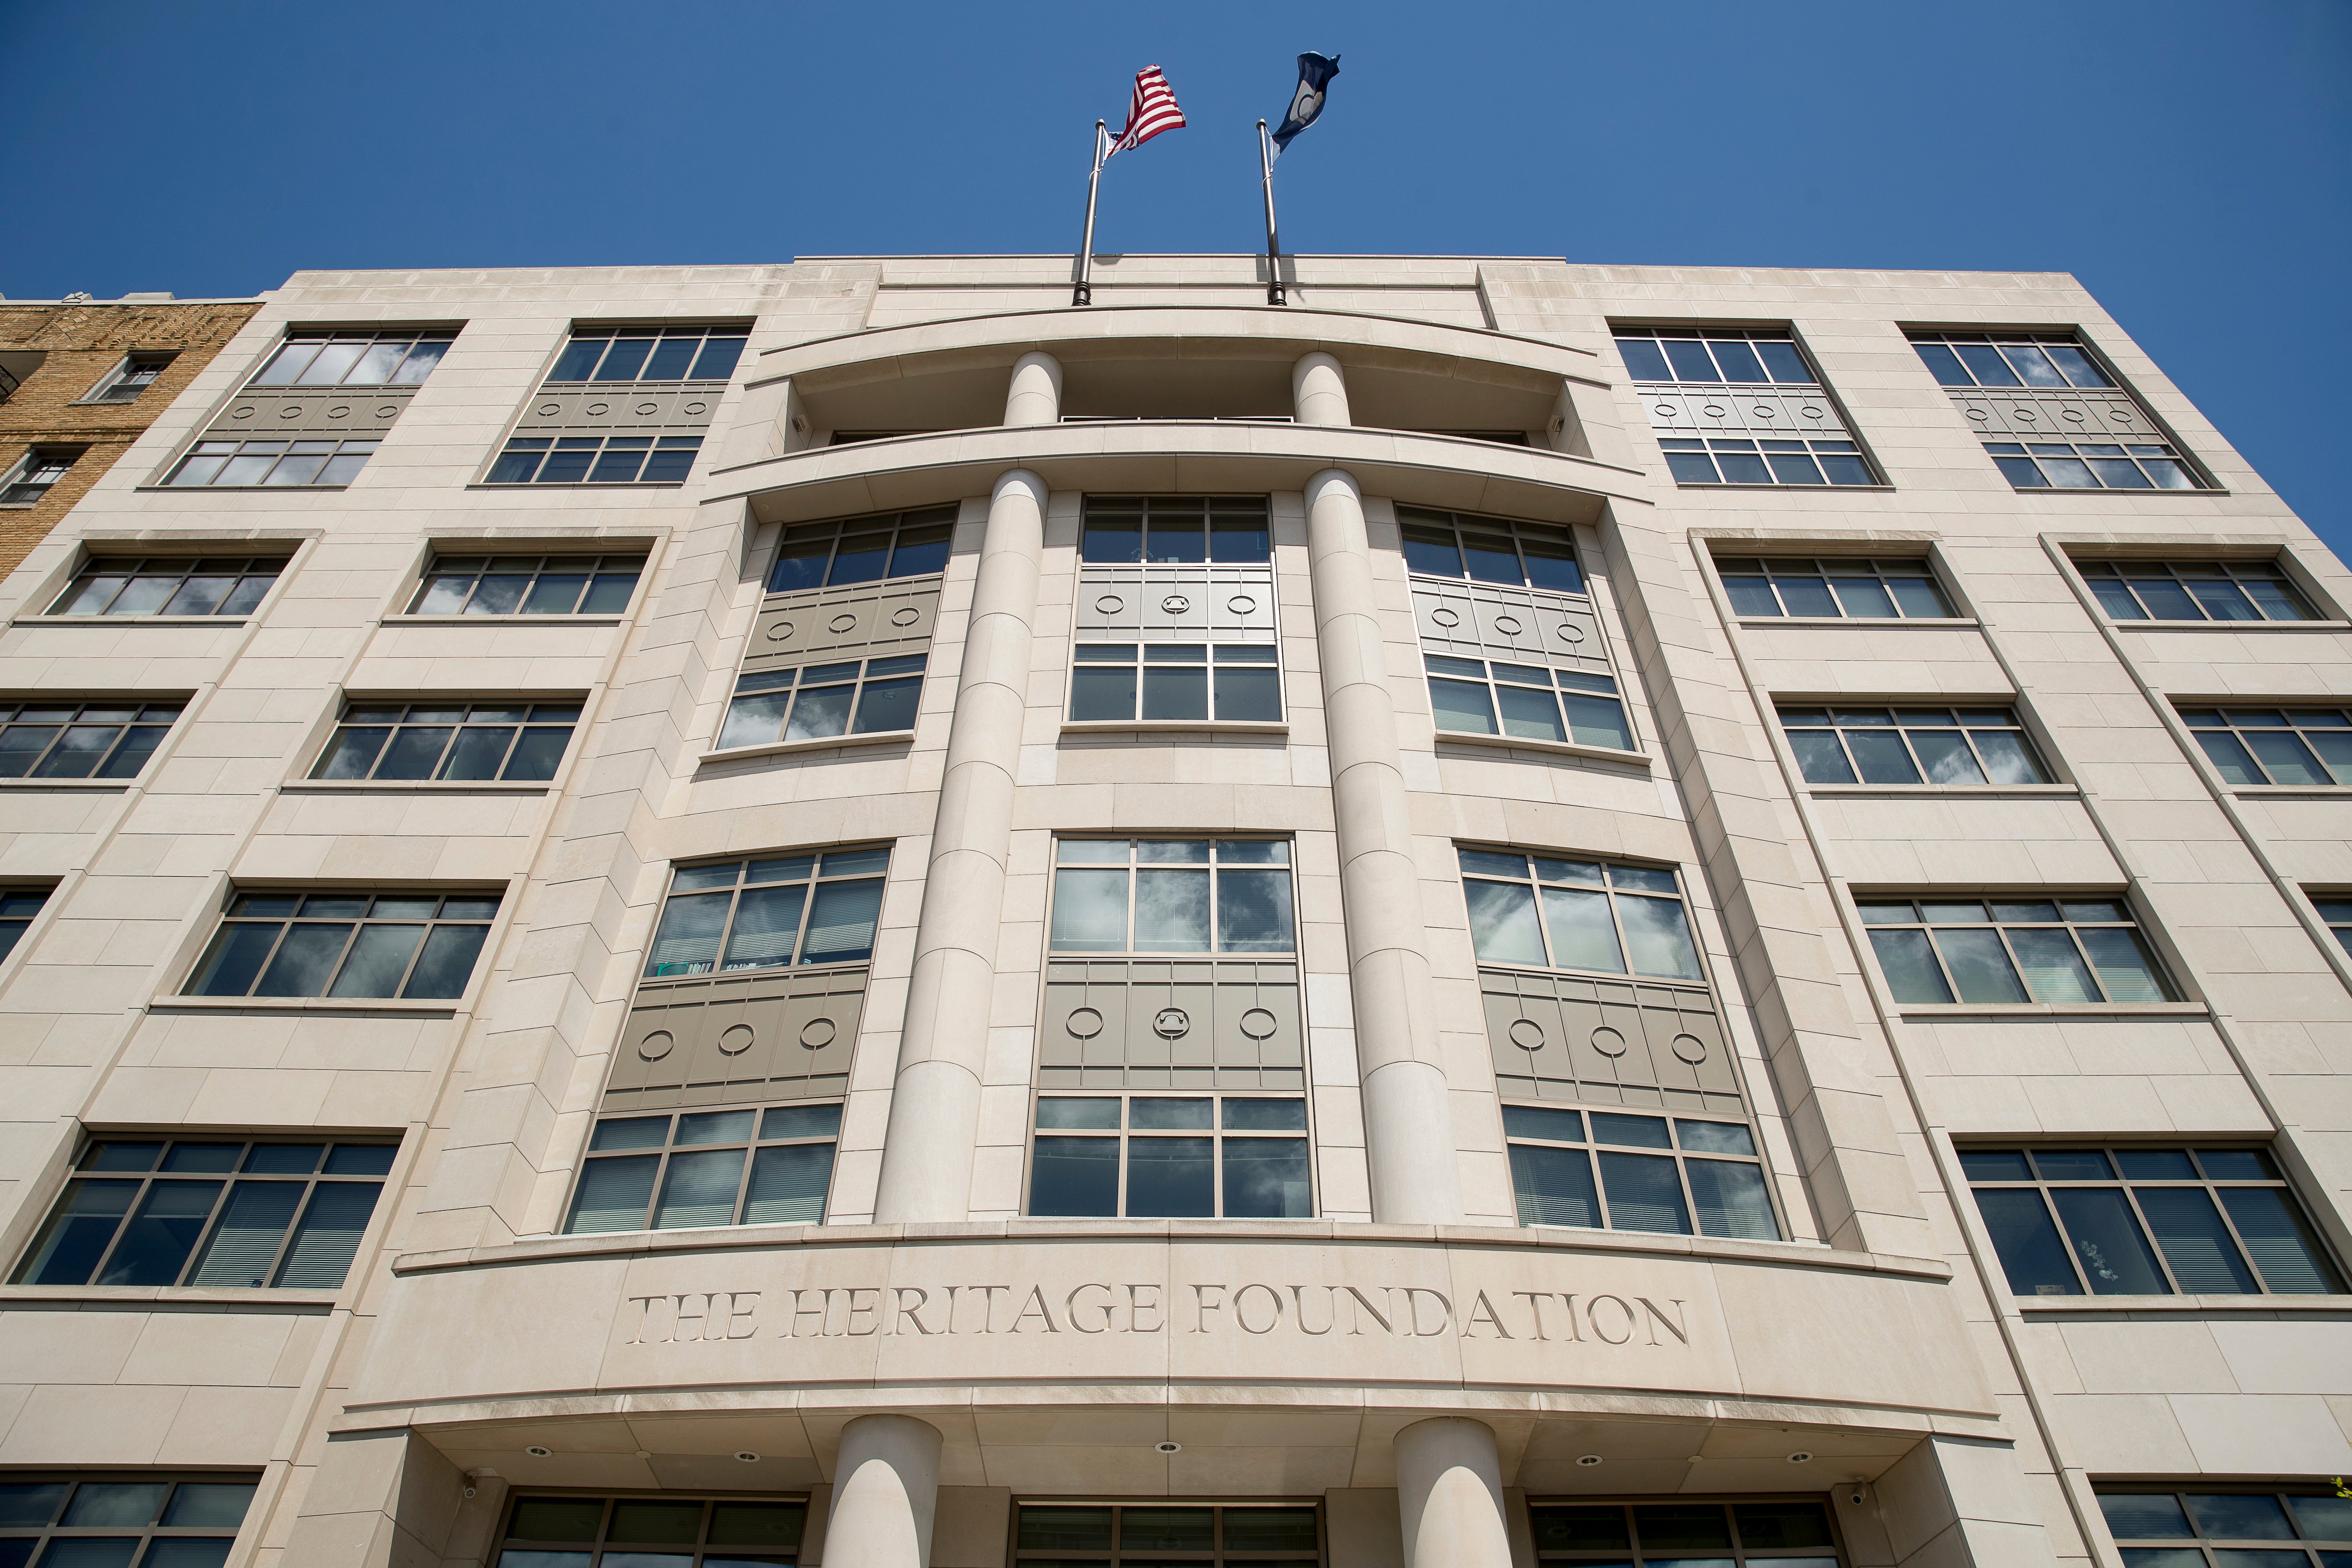 The Heritage Foundation — pictured in Washington, DC — designed Project 2025, a playbook for a potential conservative presidency following the 2024 election.